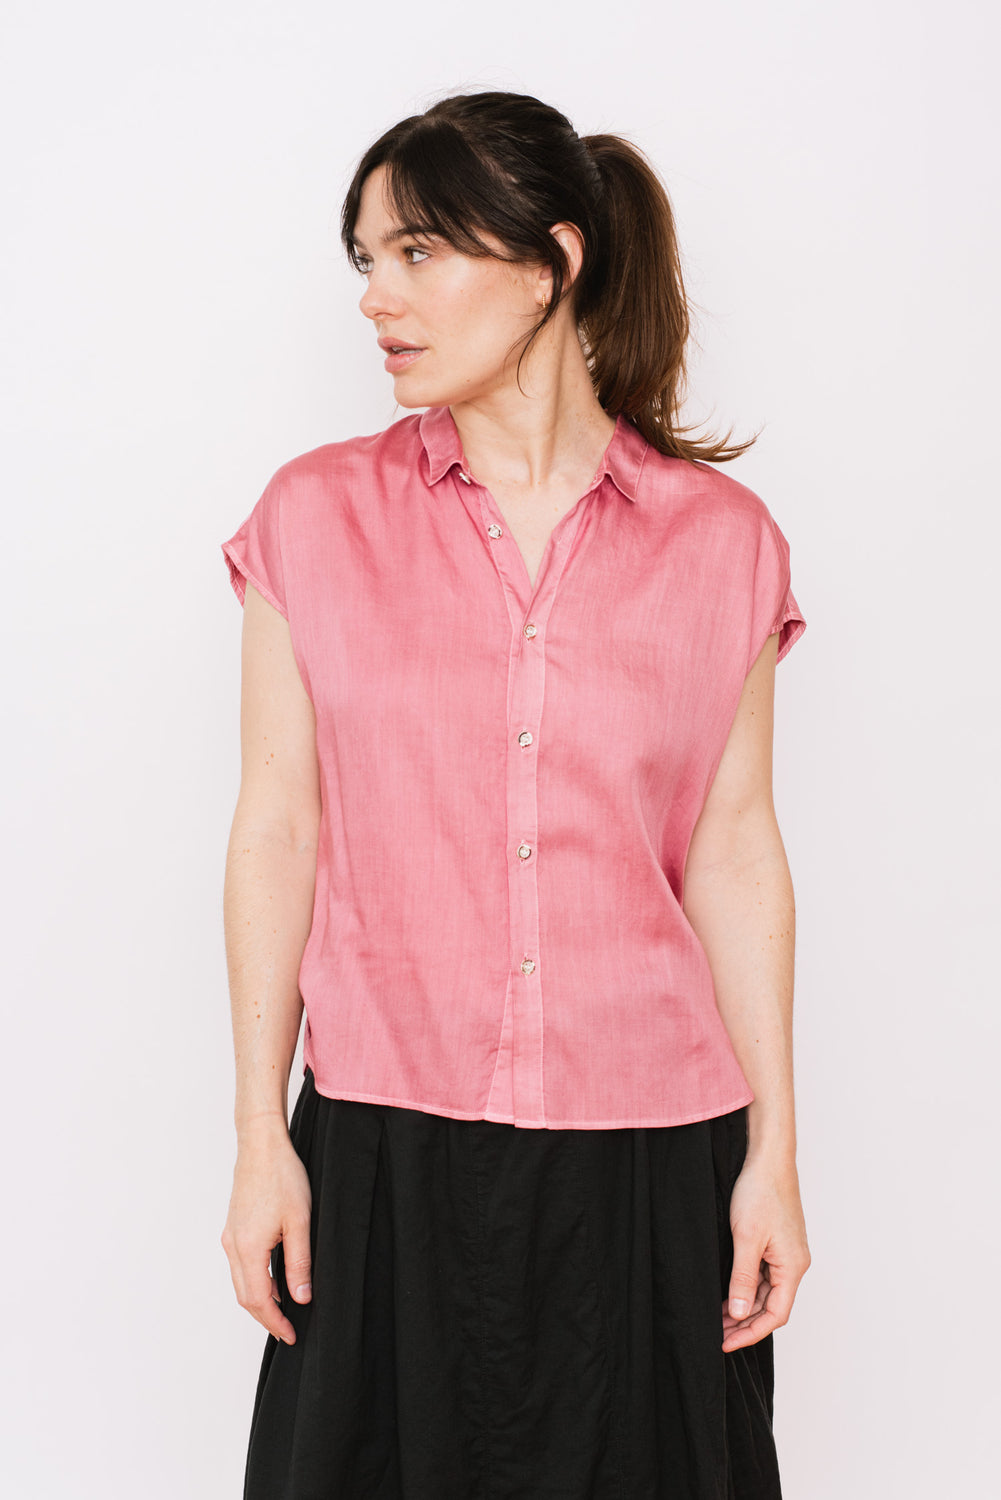 Woven Plant Dyed French Sleeve Shirt, Pink